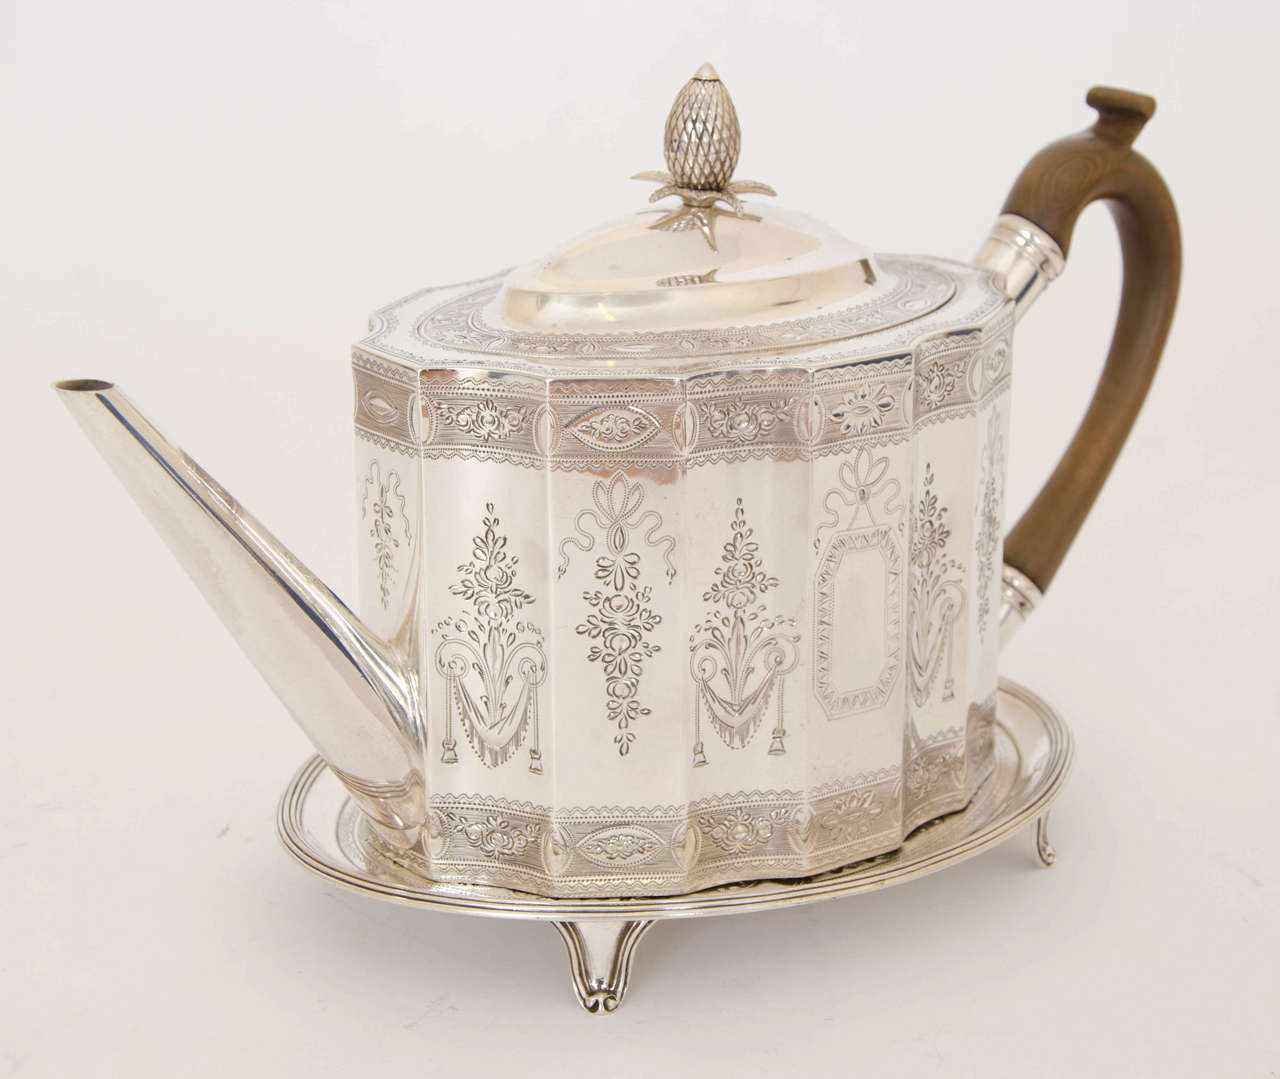 A George III shaped oval Tea Pot and oval Stand both bright-engraved to match. The pot is made by Cornelius Bland of London in 1788 , the stand is made by Thomas Hannam & John Crouch of London in 1788. The total Height of the pot and stand is 7